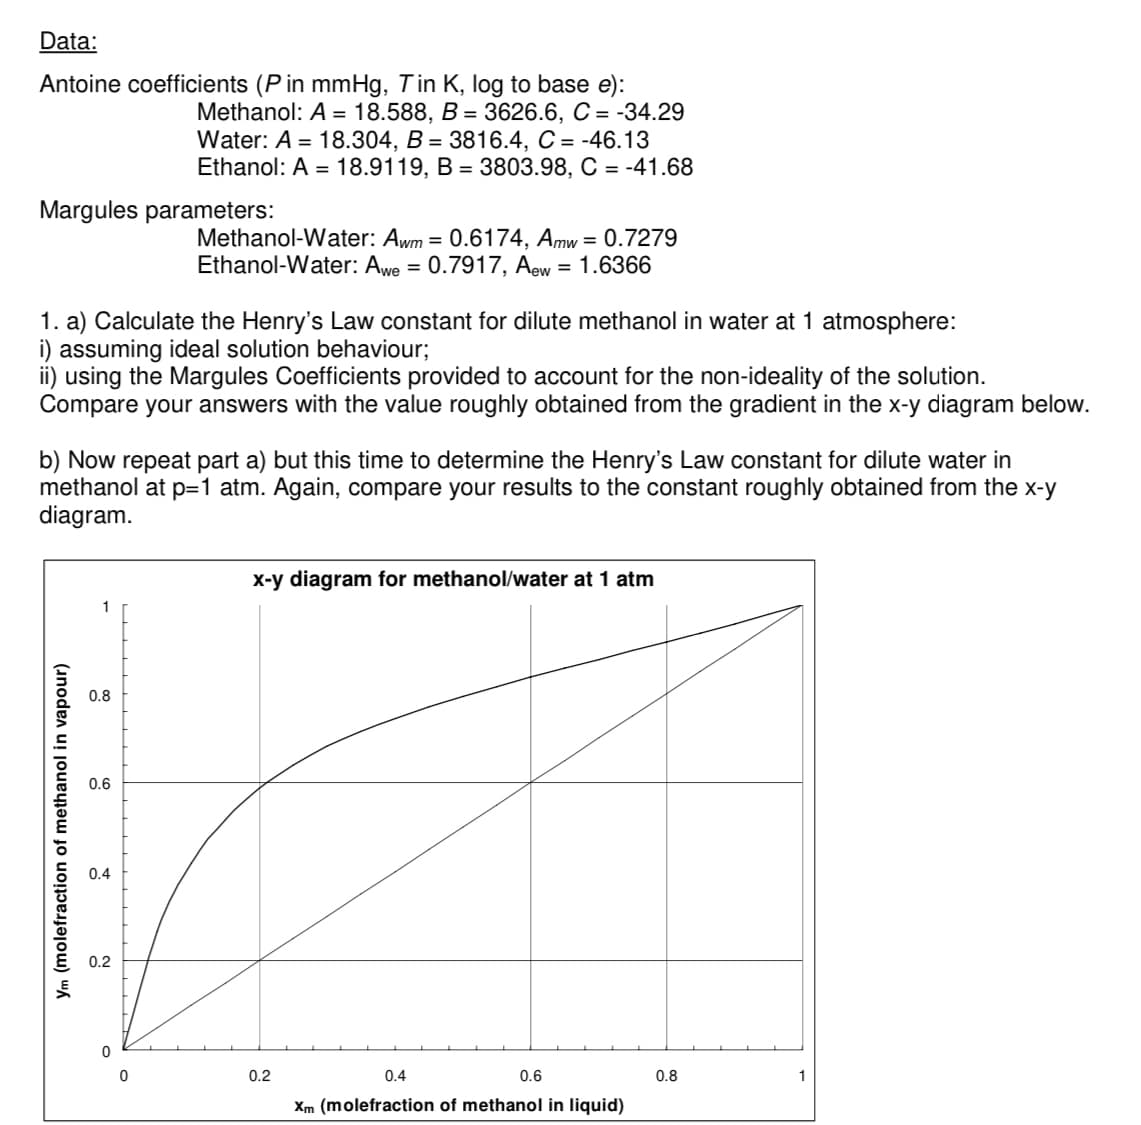 Data:
Antoine coefficients (P in mmHg, Tin K, log to base e):
Margules parameters:
1. a) Calculate the Henry's Law constant for dilute methanol in water at 1 atmosphere:
i) assuming ideal solution behaviour;
using the Margules Coefficients provided to account for the non-ideality of the solution.
Compare your answers with the value roughly obtained from the gradient in the x-y diagram below.
Ym (molefraction of methanol in vapour)
Methanol: A = 18.588, B = 3626.6, C = -34.29
Water: A = 18.304, B = 3816.4, C = -46.13
Ethanol: A = 18.9119, B = 3803.98, C = -41.68
b) Now repeat part a) but this time to determine the Henry's Law constant for dilute water in
methanol at p=1 atm. Again, compare your results to the constant roughly obtained from the x-y
diagram.
0.8
0.6
Methanol-Water: Awm = 0.6174, Amw = 0.7279
Ethanol-Water: Awe = 0.7917, Aew = 1.6366
0.4
0.2
x-y diagram for methanol/water at 1 atm
0.2
0.6
0.4
Xm (molefraction of methanol in liquid)
0.8